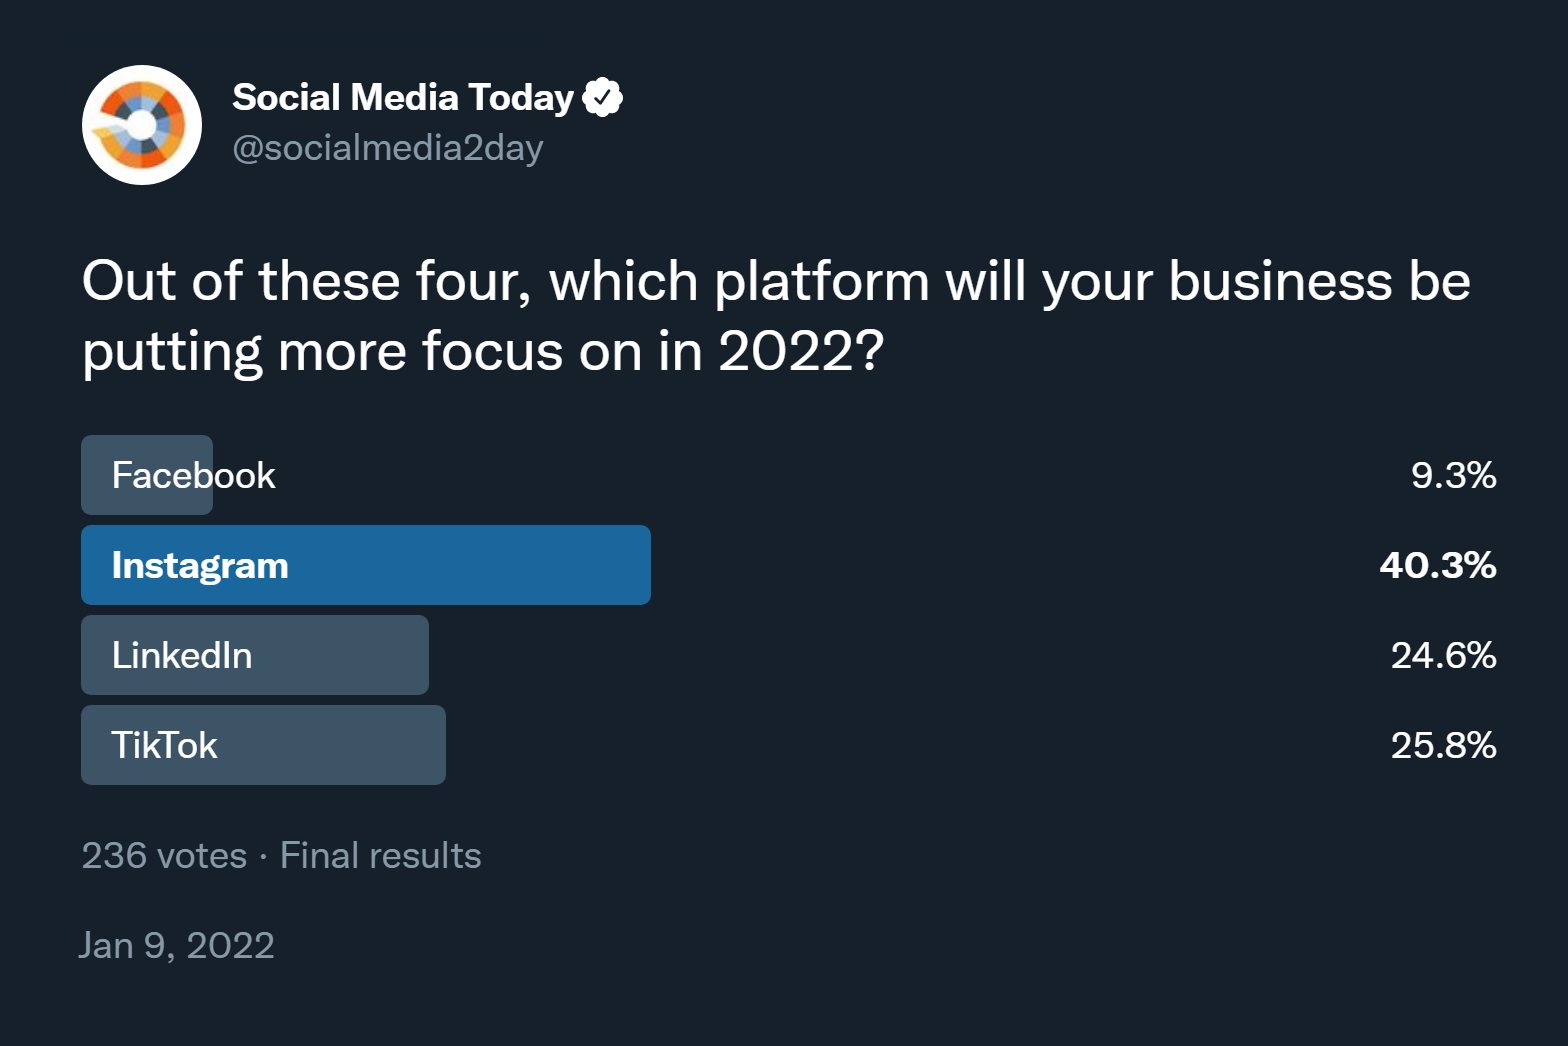 Out of these four, which platform will your business be putting more focus on in 2022?